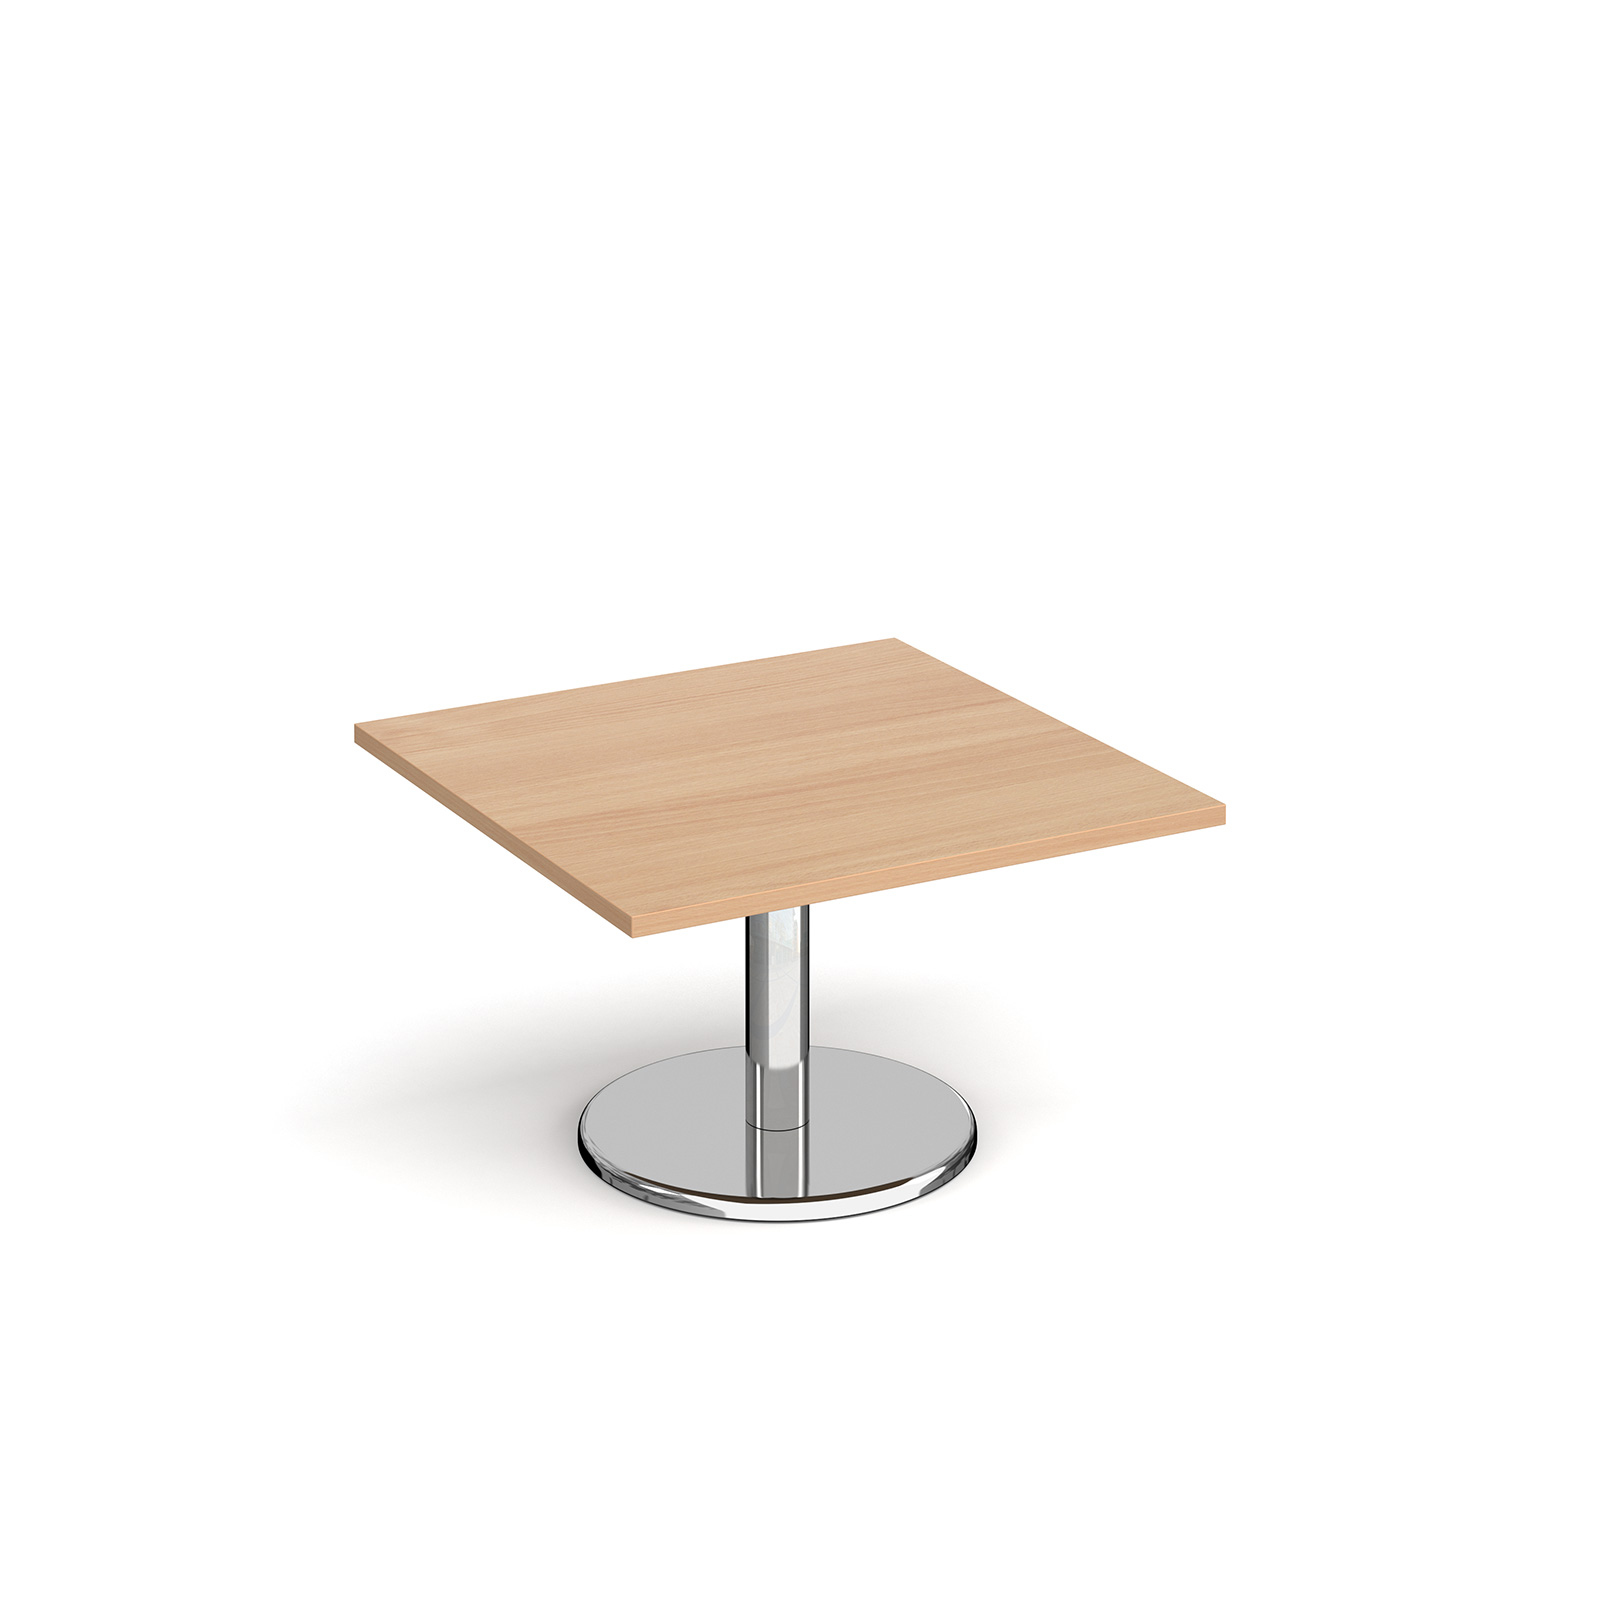 Pisa square coffee table with round chrome base 800mm - beech